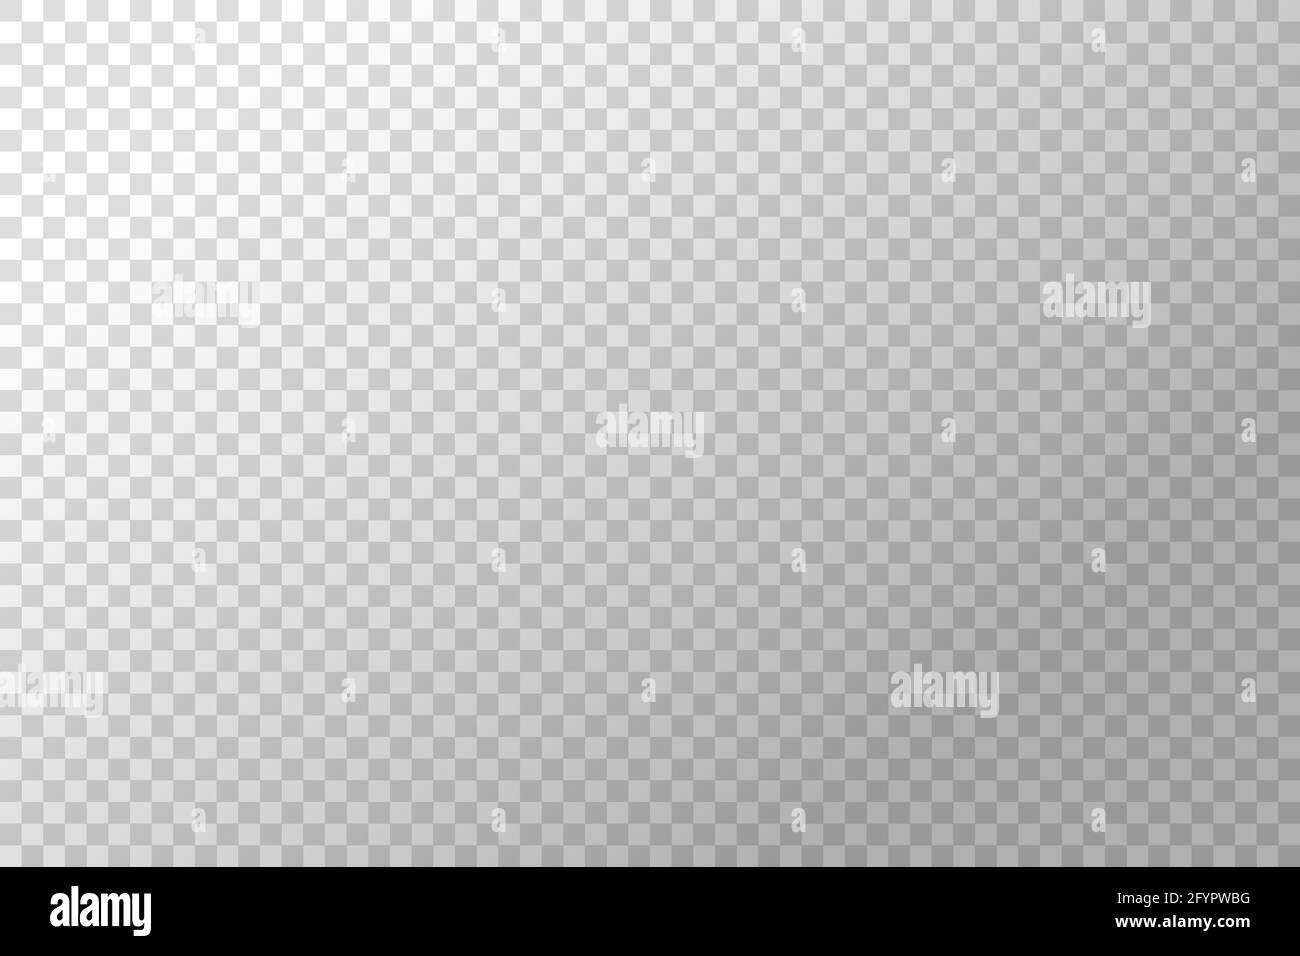 Vector Background - A Grid With A Pattern In A Checkerboard Showing  Transparency In A Graphic Editor, Seamless Pattern Royalty Free SVG,  Cliparts, Vectors, and Stock Illustration. Image 86908137.